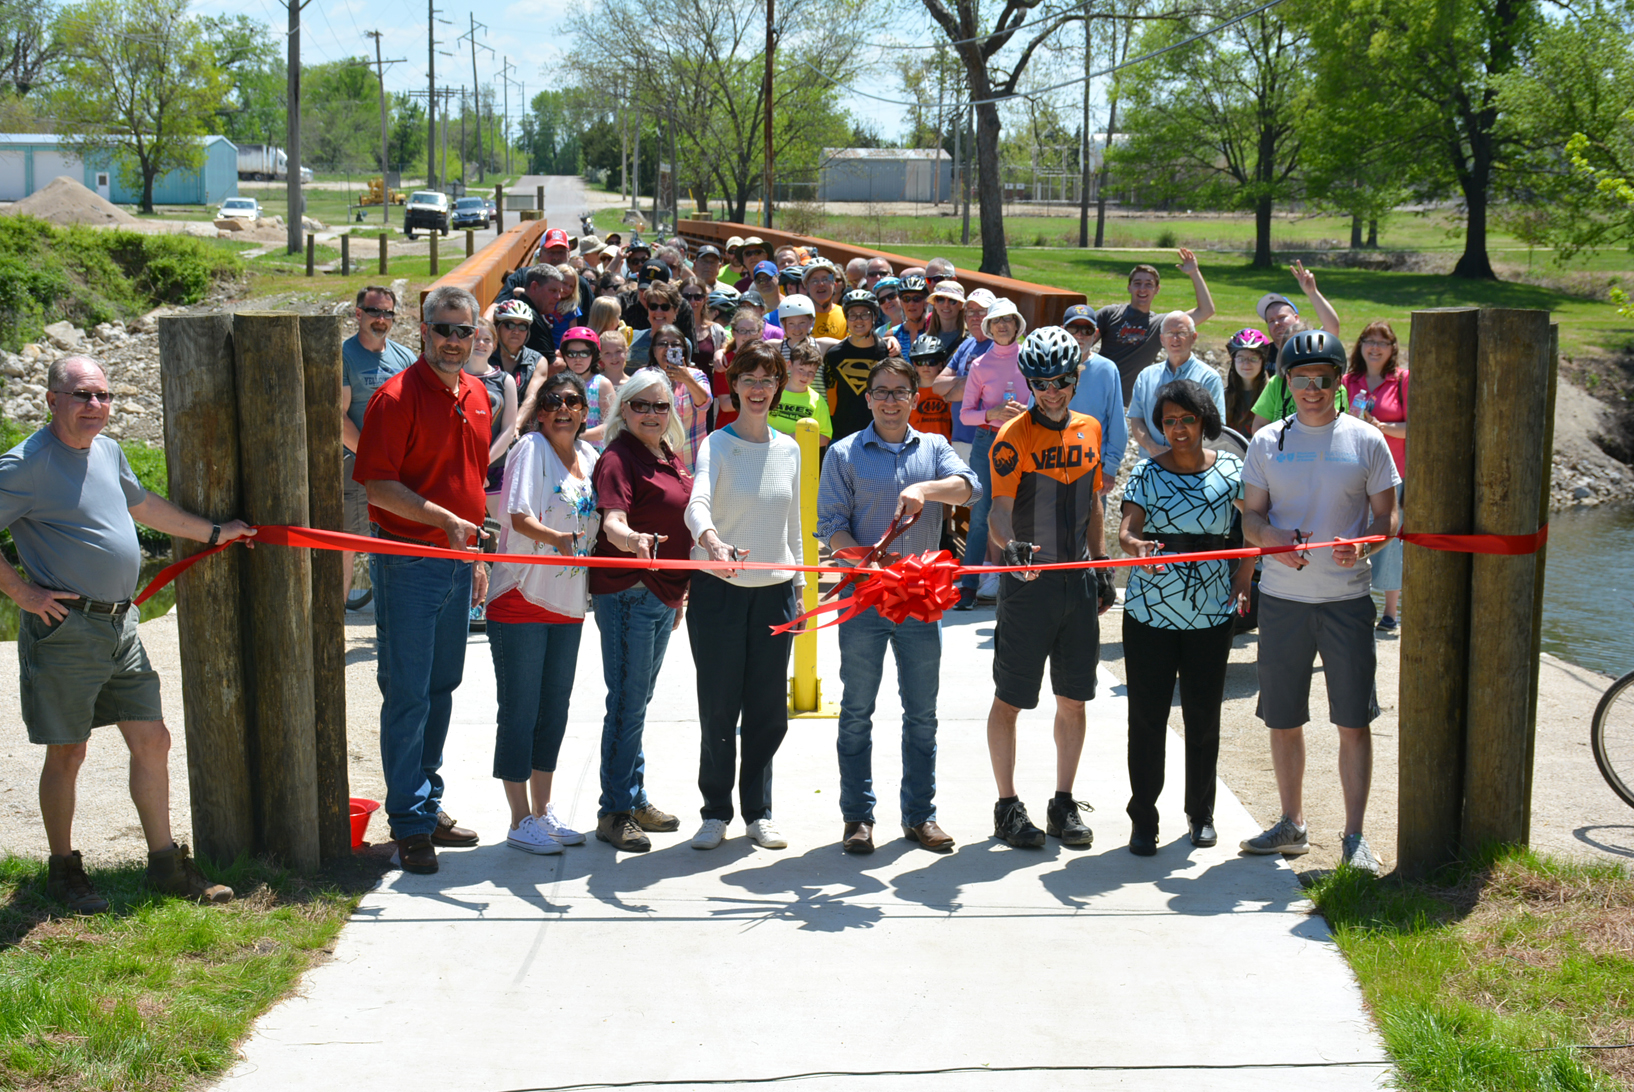 King of Trails Washington Ave. Pedestrian Bridge is Officially OPEN!